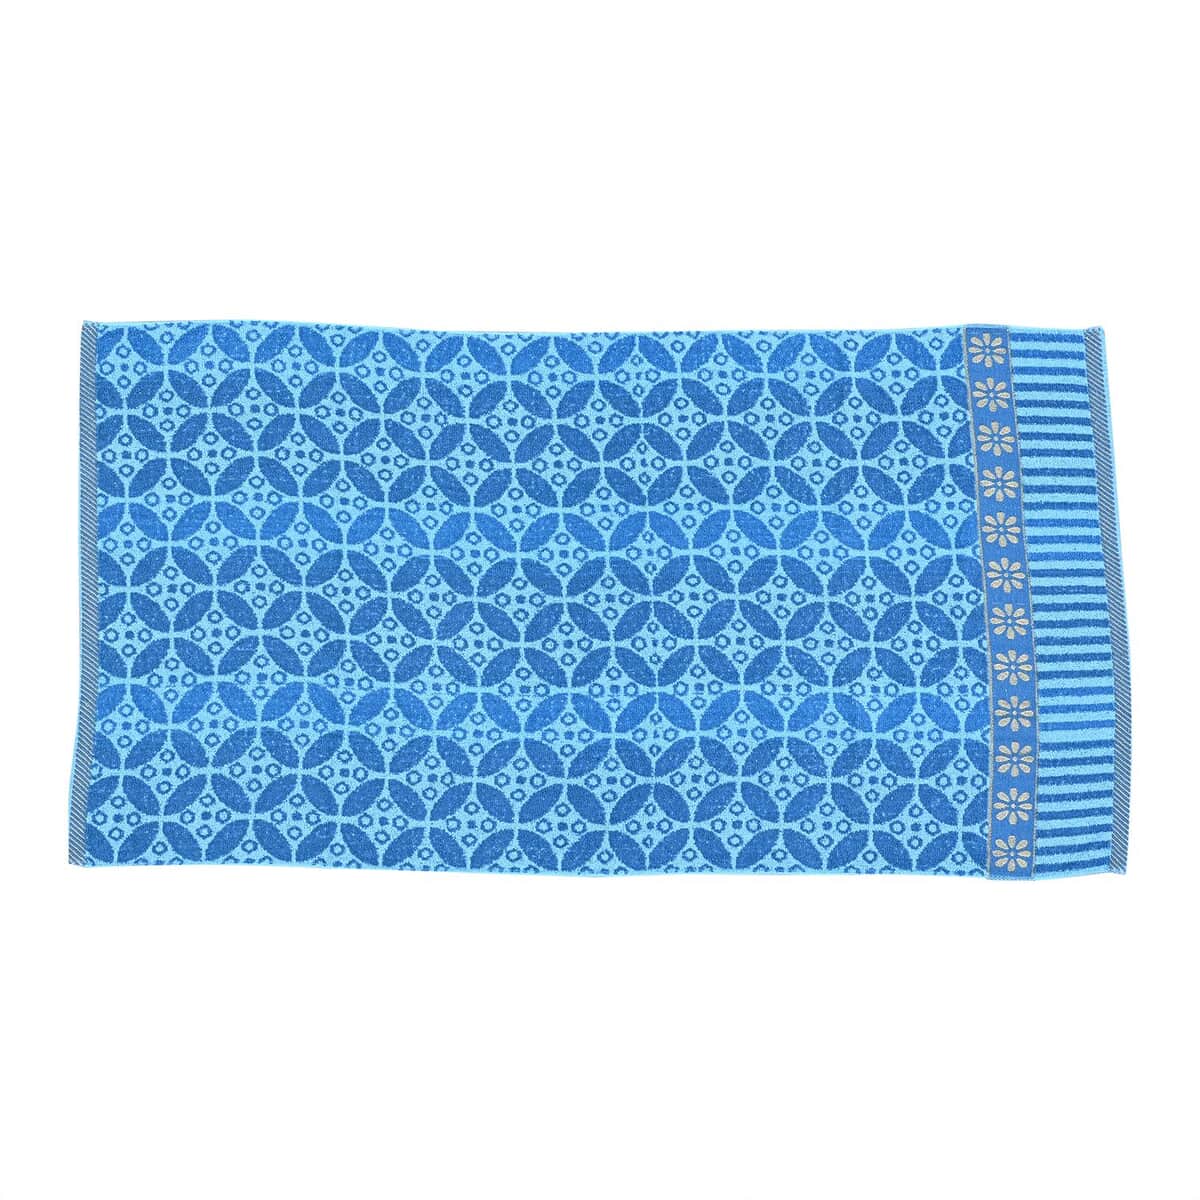 Light Blue 90% Cotton and 10% Polyester Comfortable Bath Towel image number 0